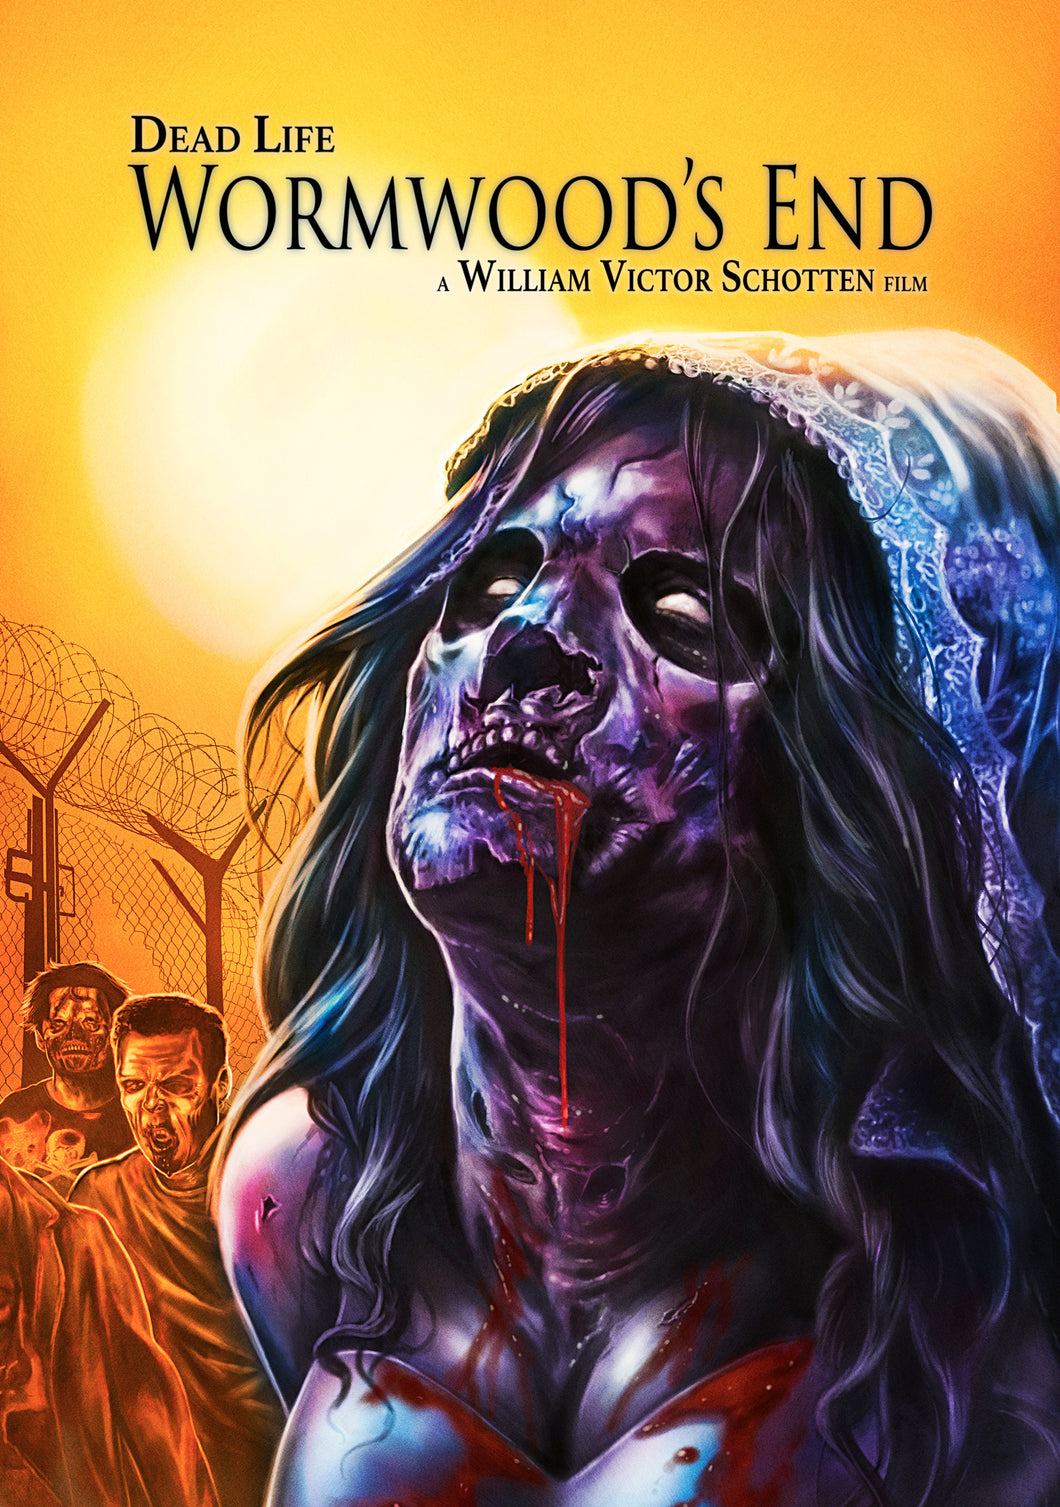 Dead Life: Wormwood's End Bluray